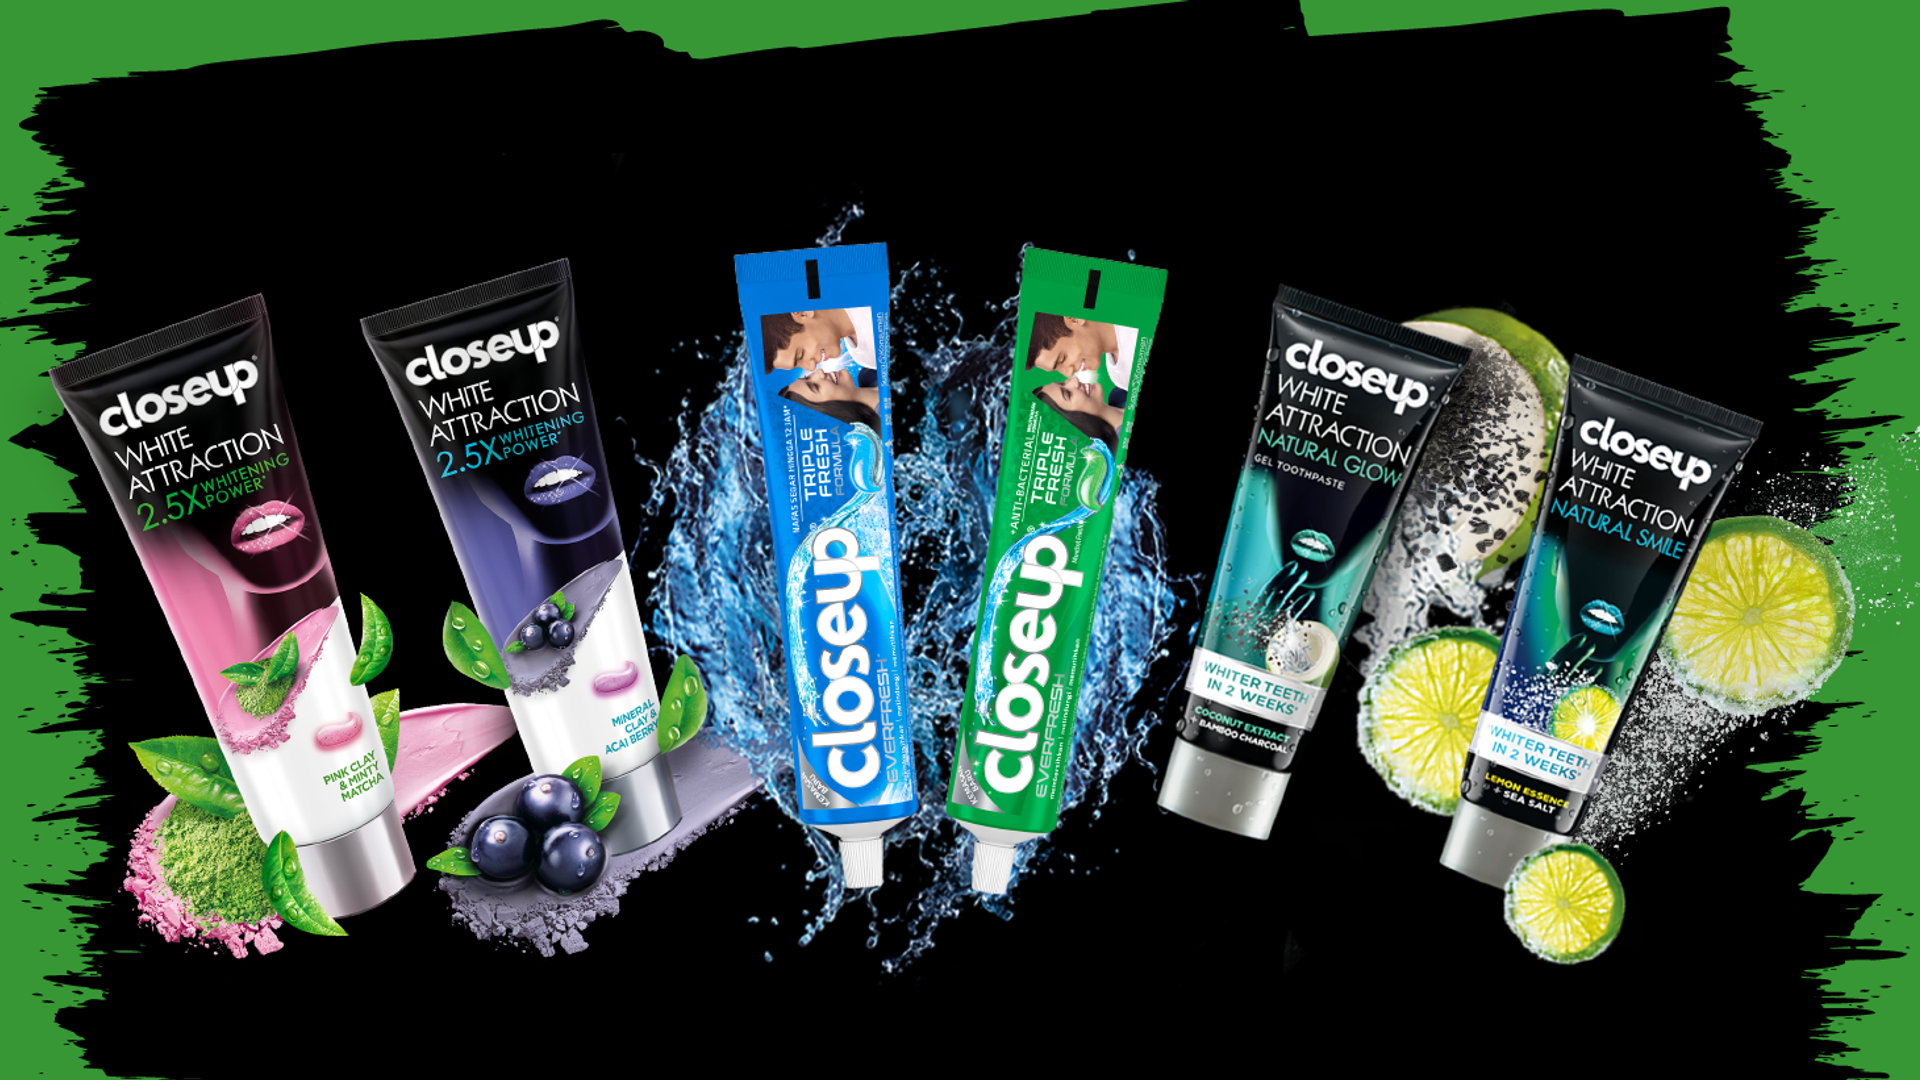 Closeup toothpaste products: Closeup White Attraction Pink Clay & Minty Matcha, Closeup White Attraction  Mineral Clay & Acai Berry, Closeup Icy White, Closeup Everfresh,  Closeup Icy White, Closeup White Attraction Natural Glow and Closeup White Attraction  Natural Smile